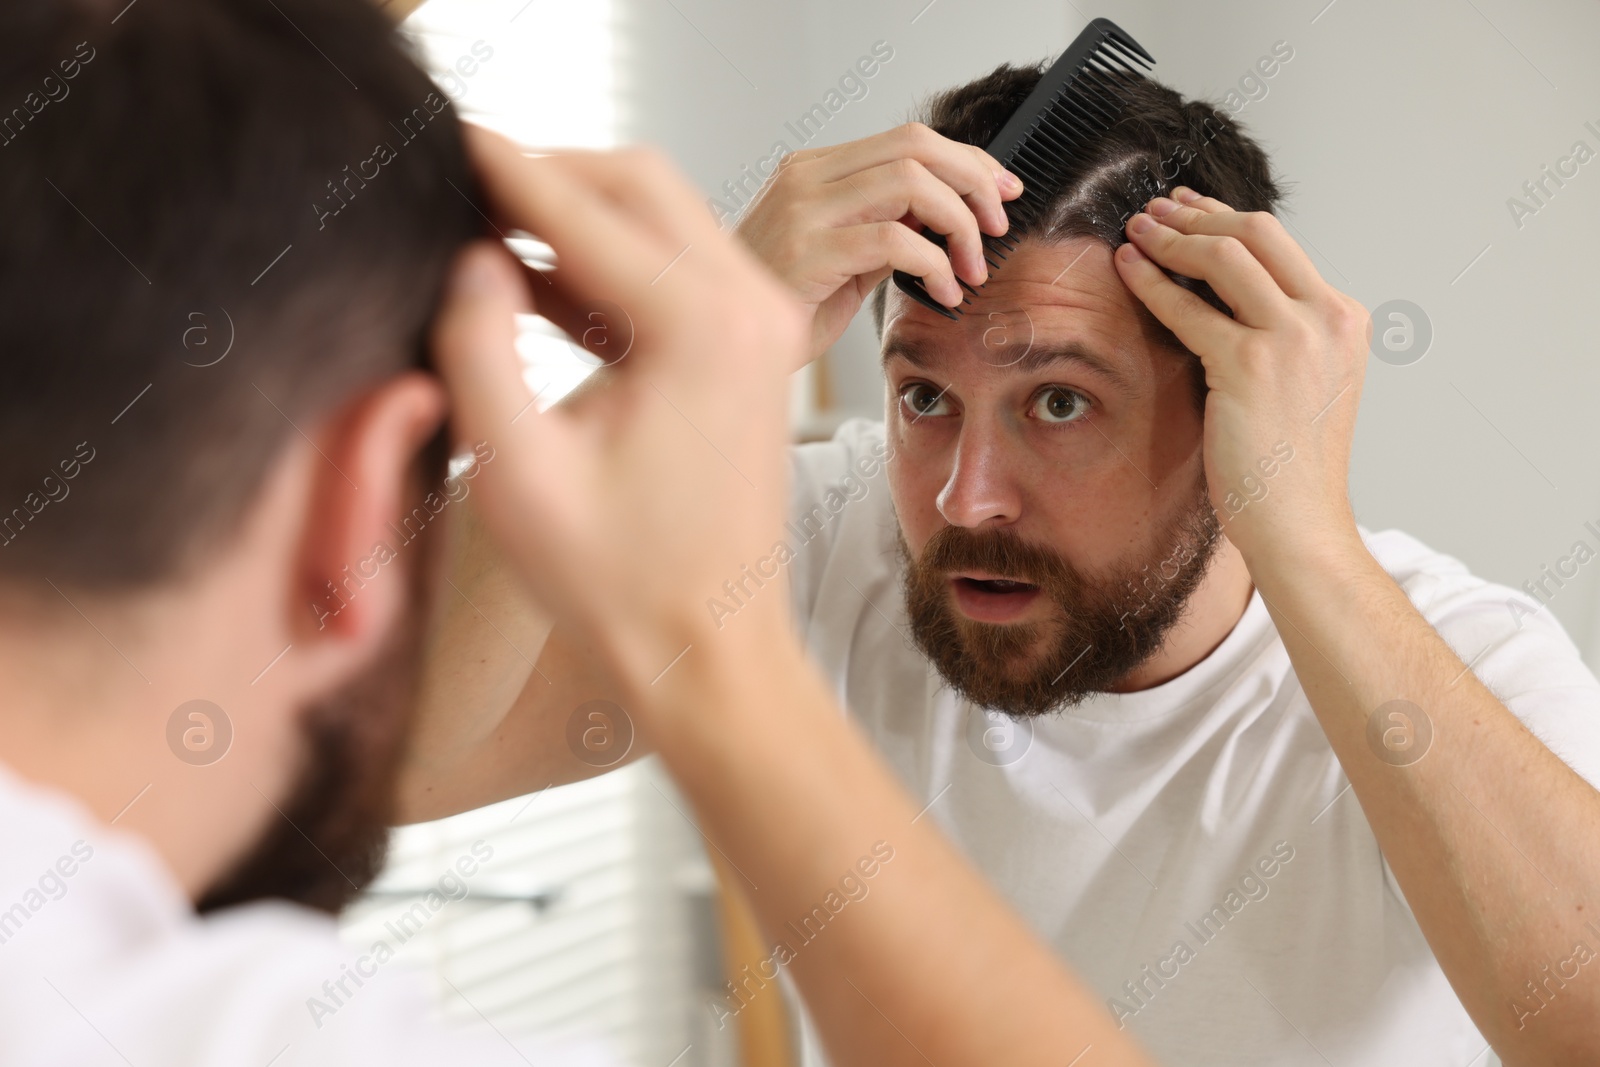 Photo of Dandruff problem. Man with comb examining his hair and scalp near mirror indoors